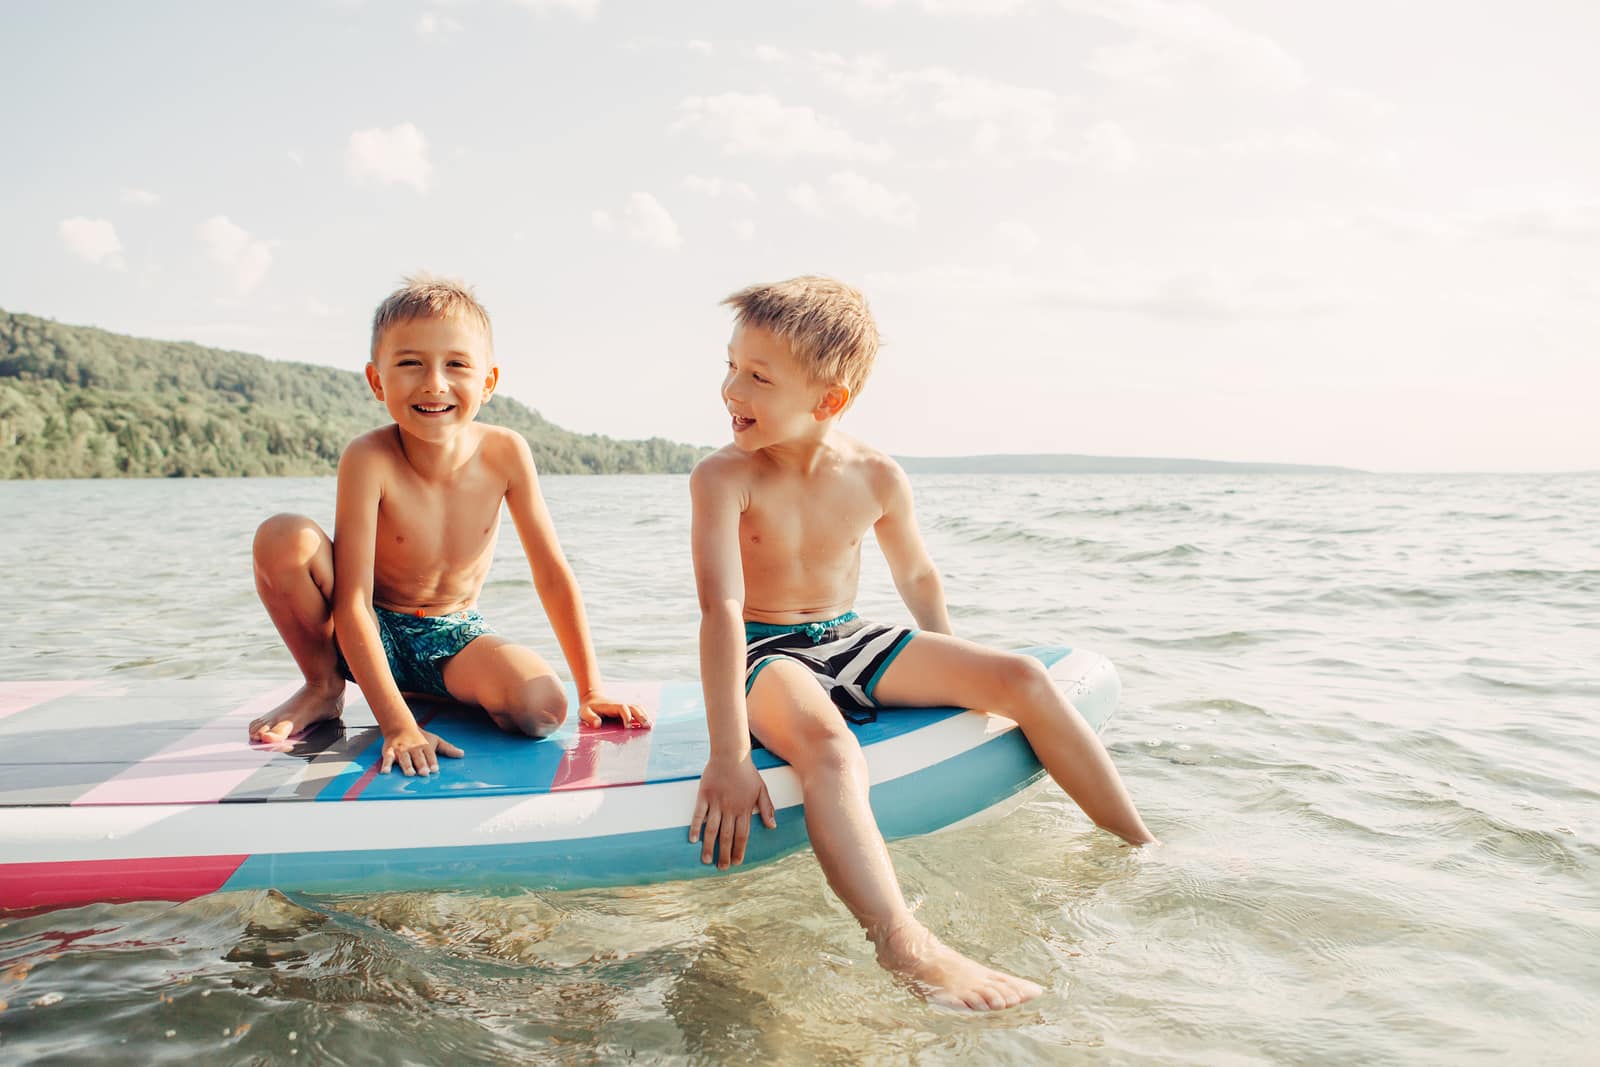 Two smiling Caucasian boys kids sitting on paddle sup surfboard in water